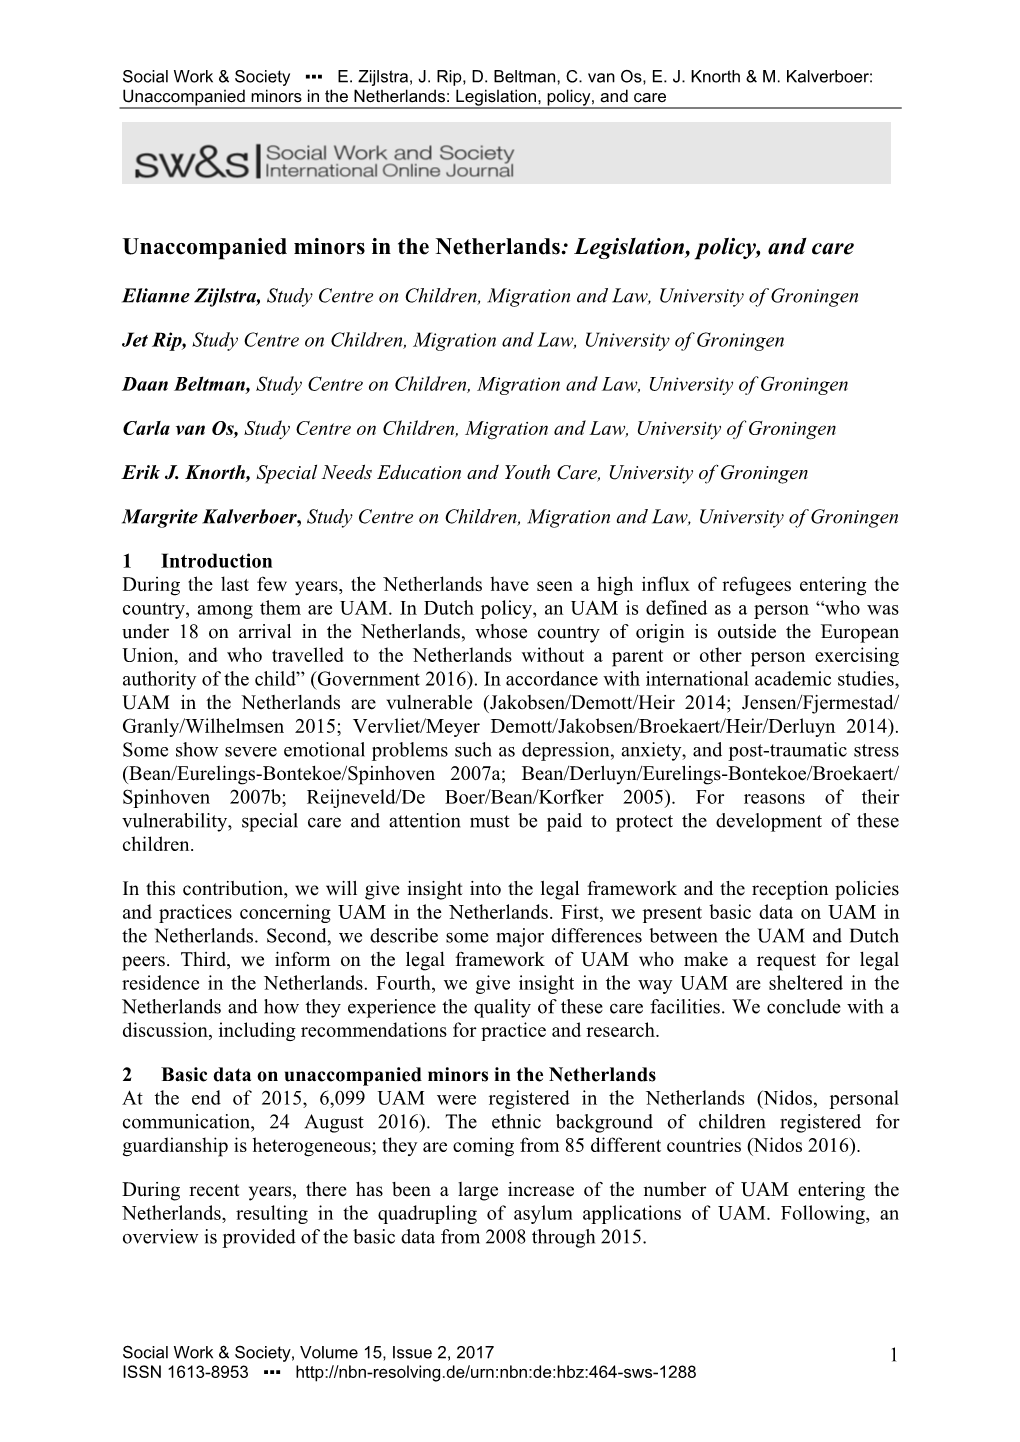 Unaccompanied Minors in the Netherlands: Legislation, Policy, and Care